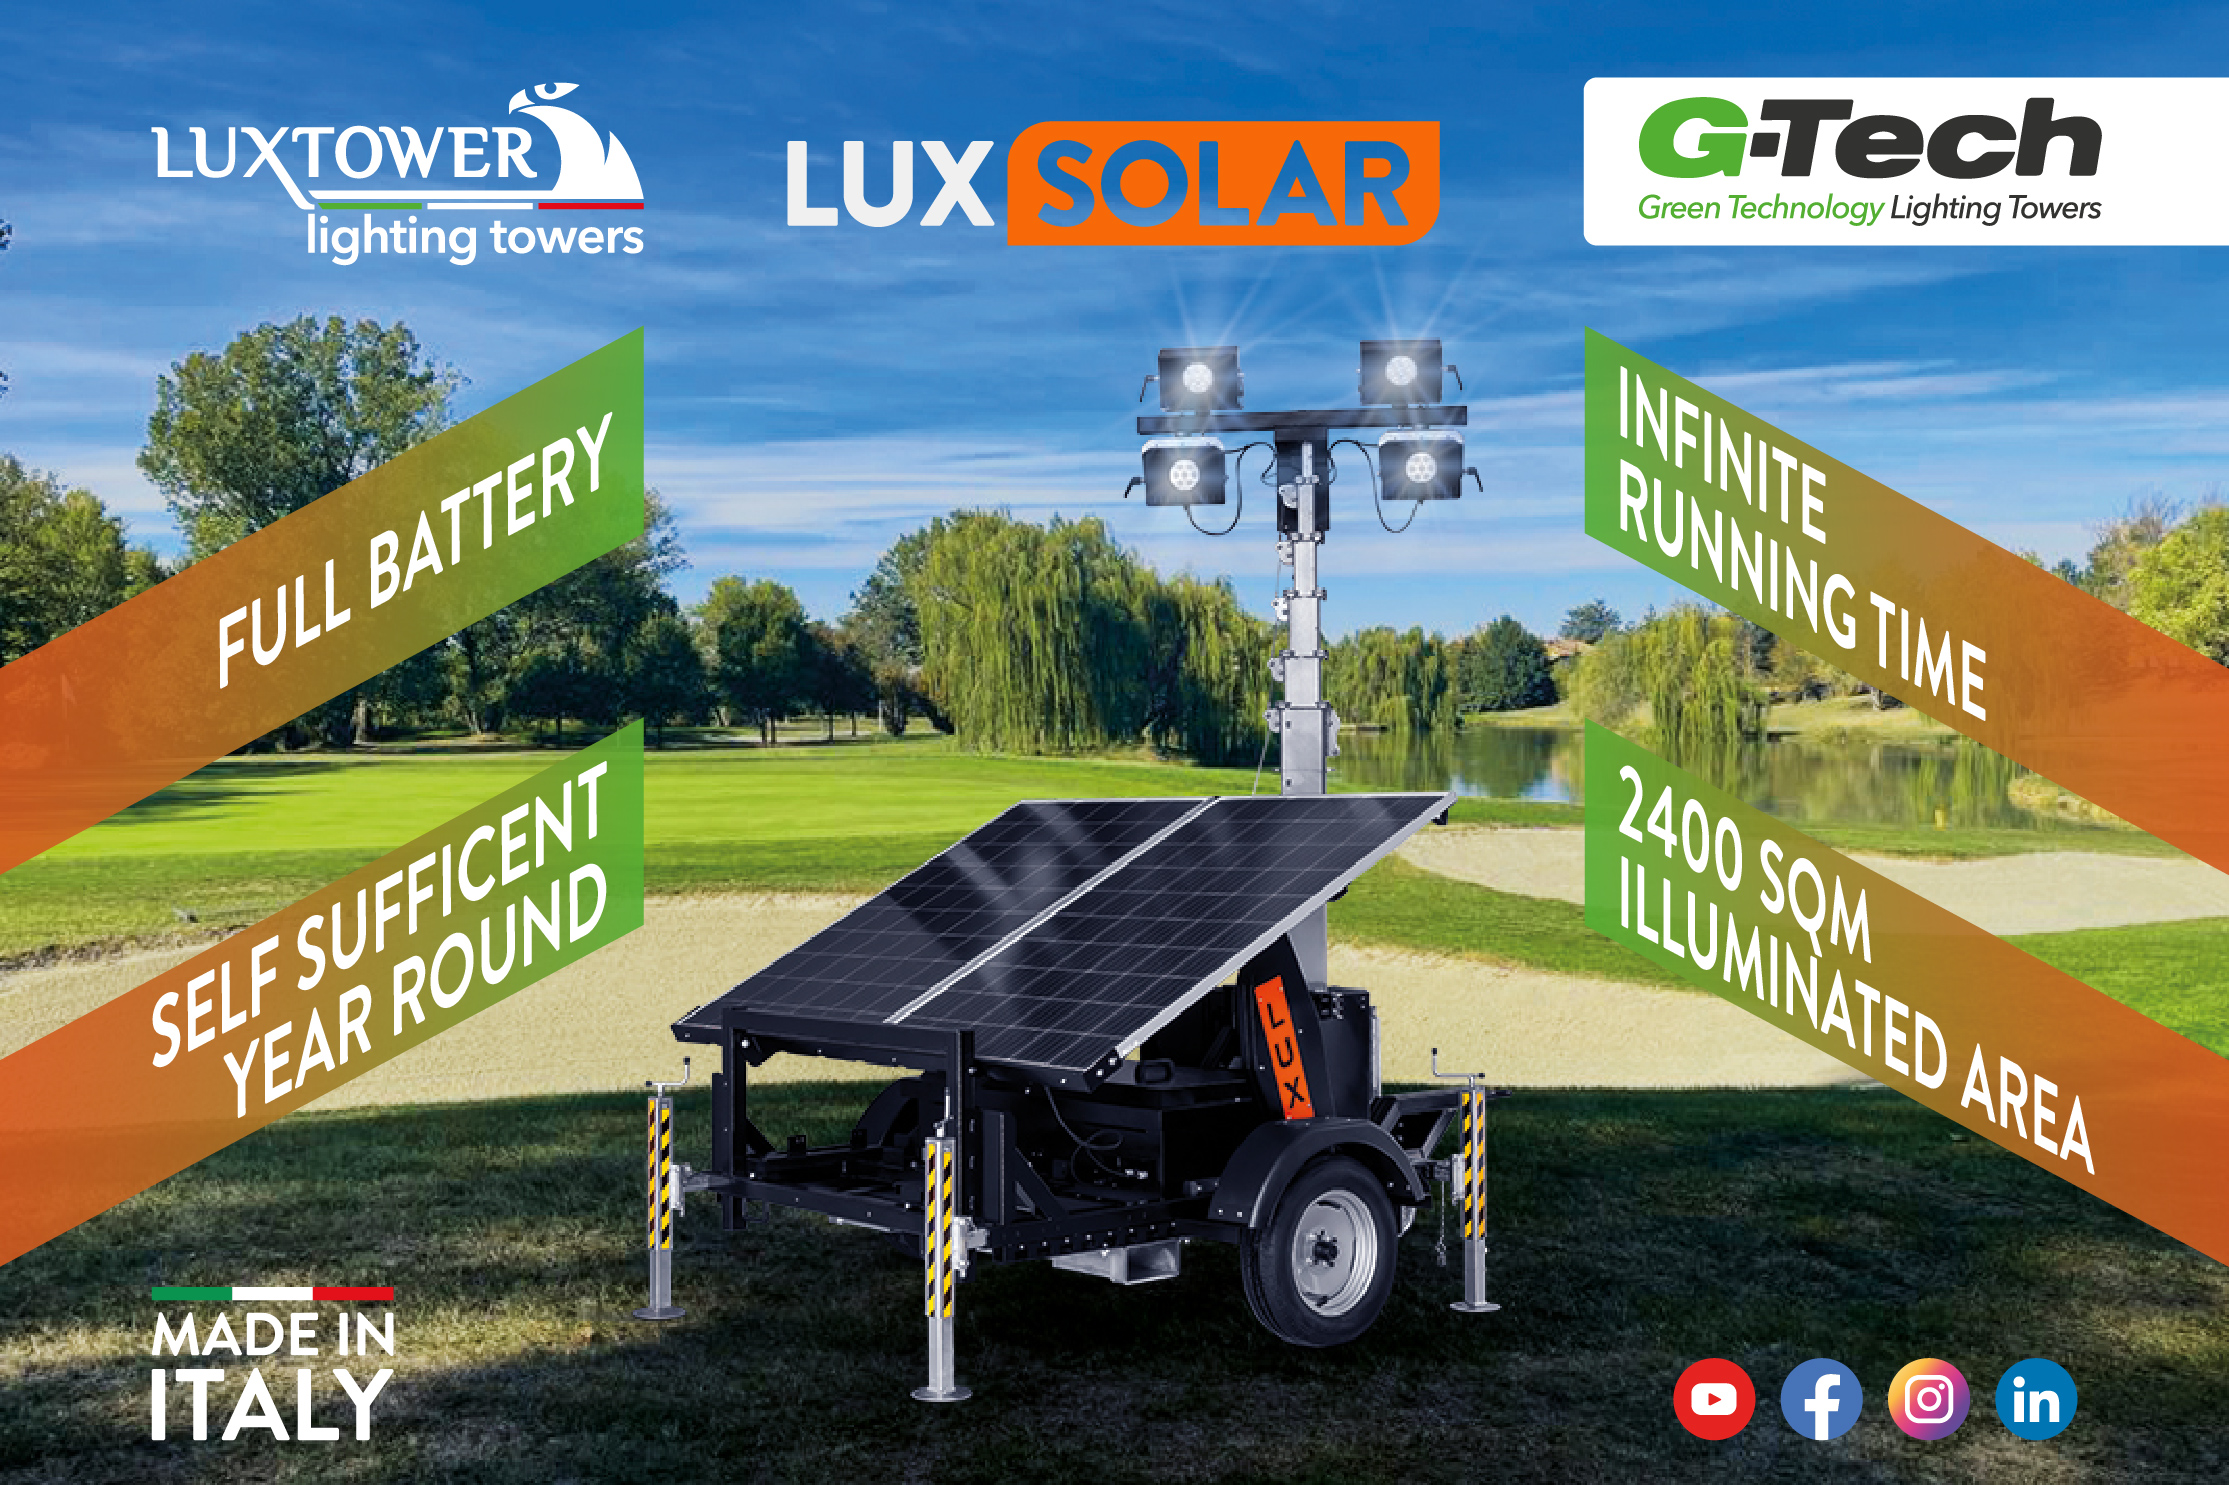 Luxtower light towers for civil and industrial construction, oil and gas and events